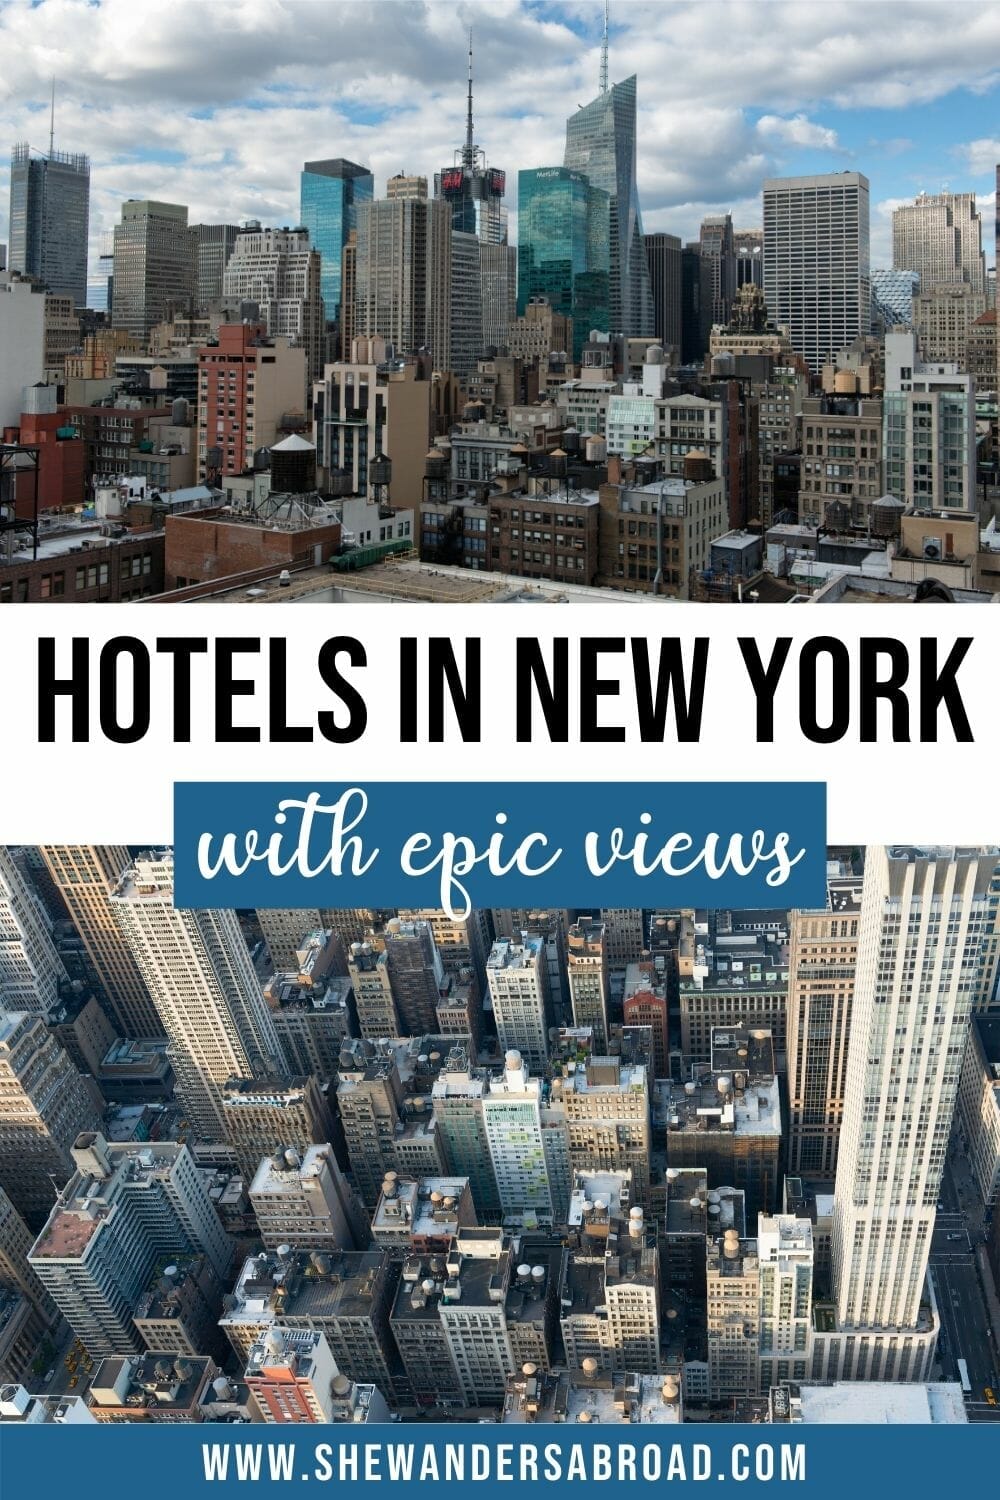 18 Incredible Hotels with the Best Views in NYC